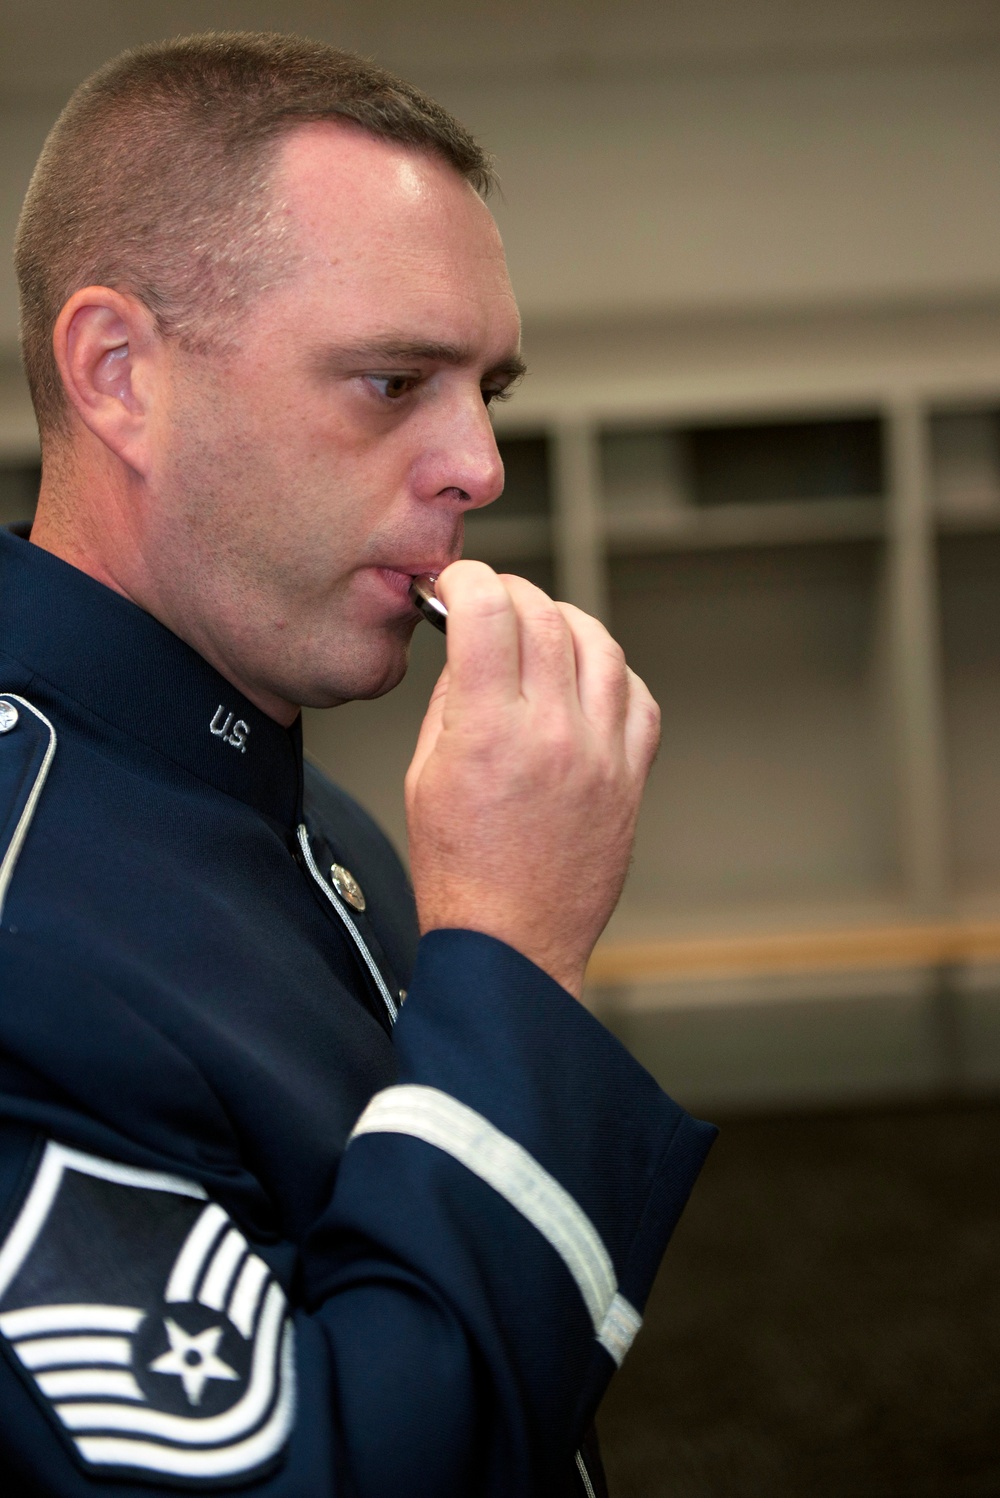 Singing Sergeant continues century-old national anthem tradition